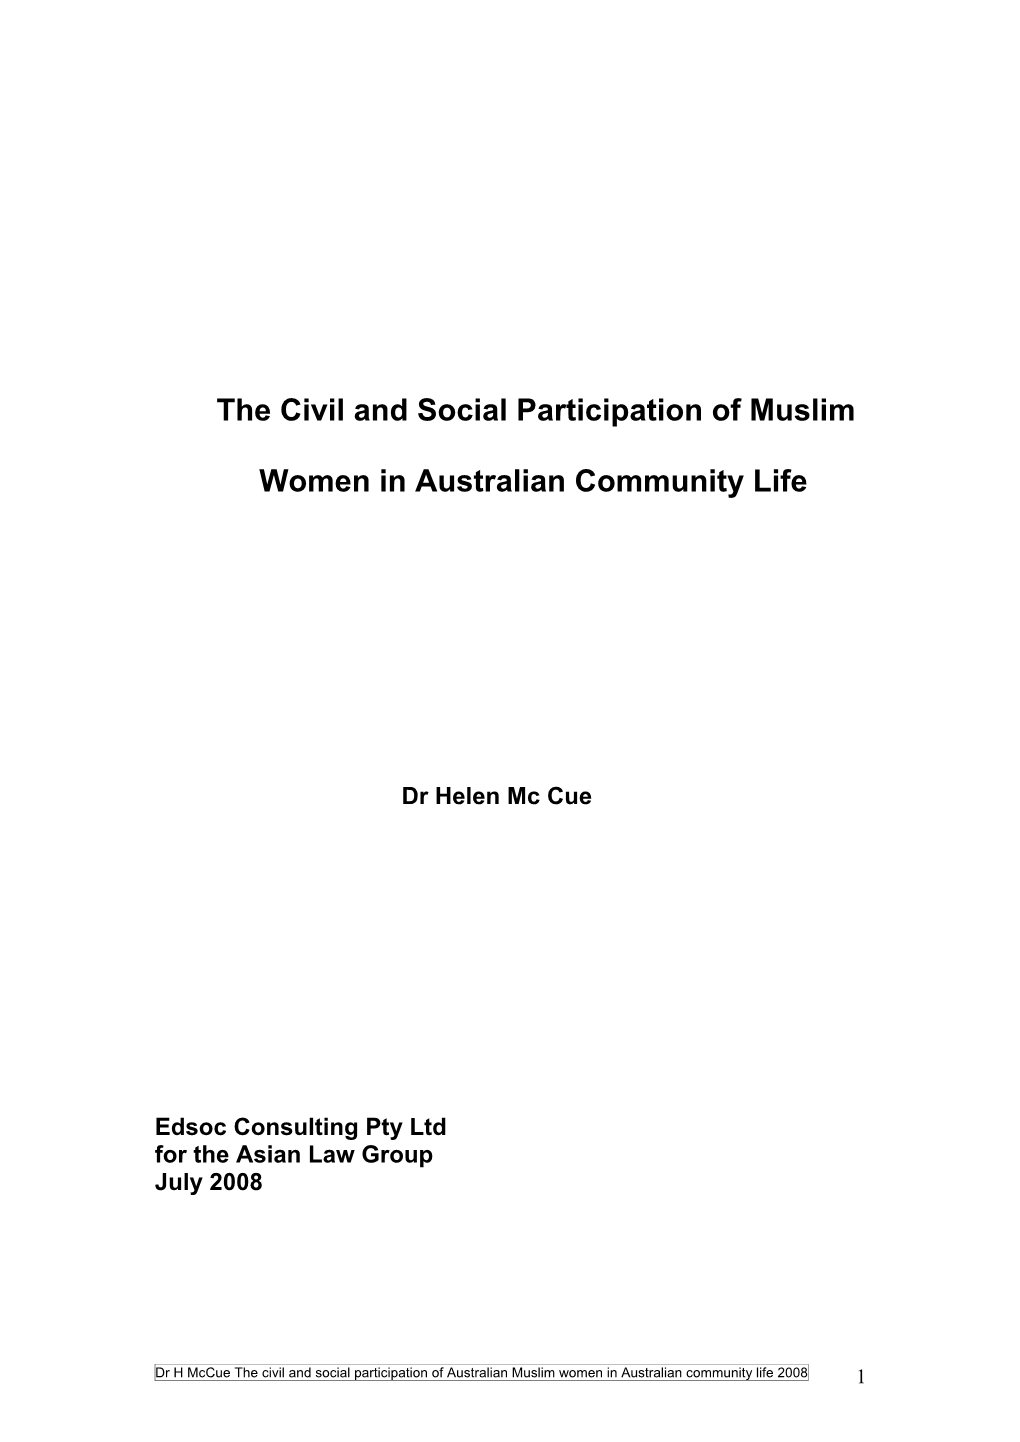 The Civil and Social Participation of Muslim Women in Australian Community Life